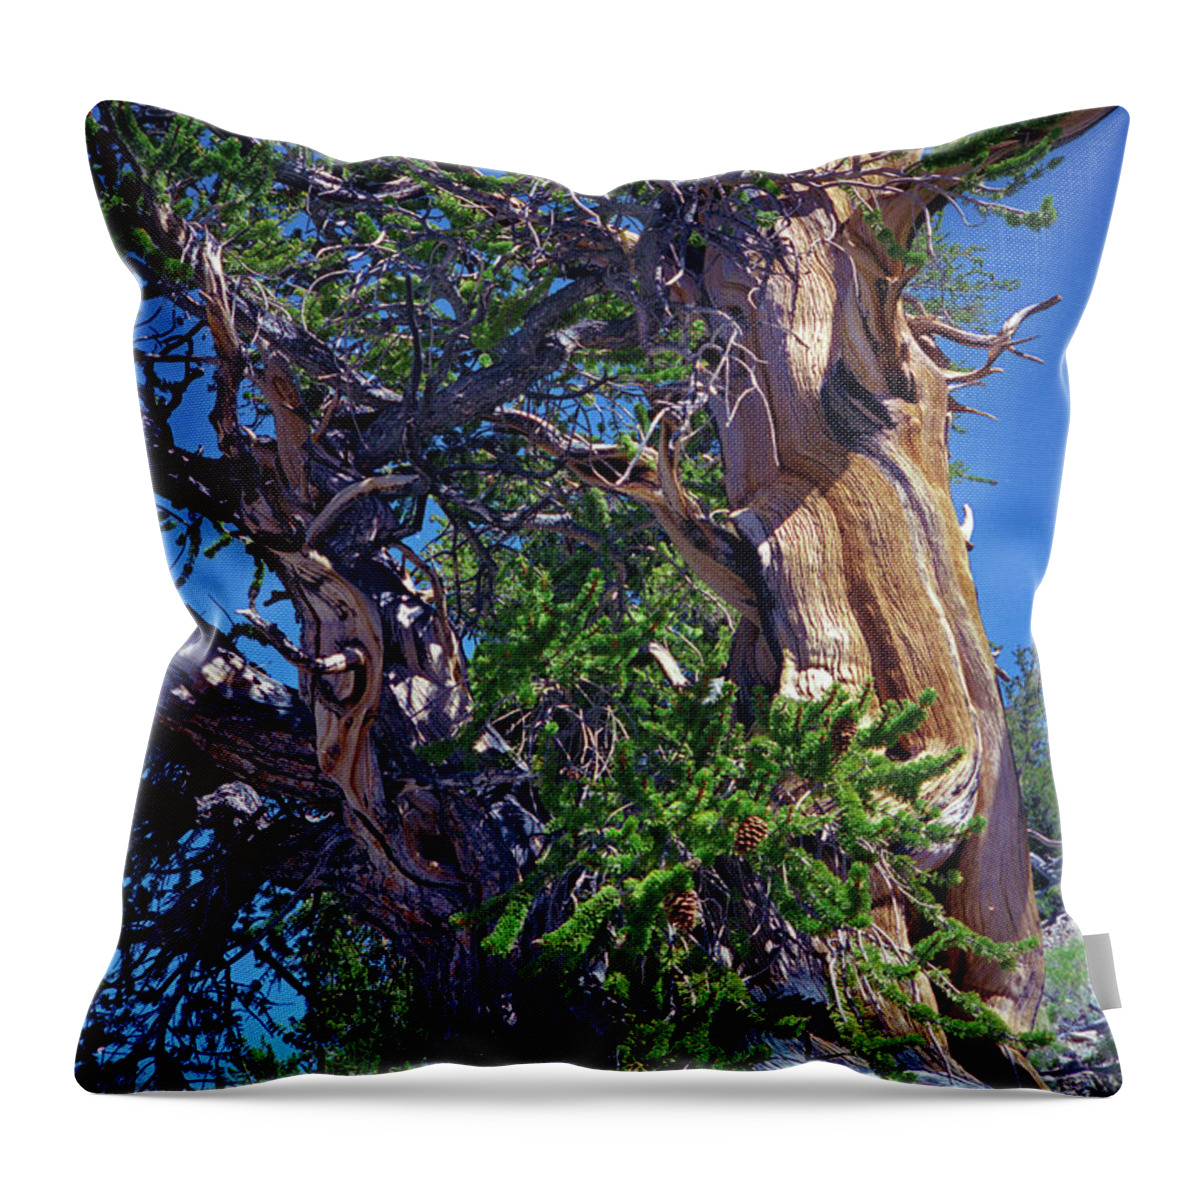 Bristlecone Pine Throw Pillow featuring the photograph Ancient Bristlecone Pine Tree Composition 3, Inyo National Forest, White Mountains, California by Kathy Anselmo